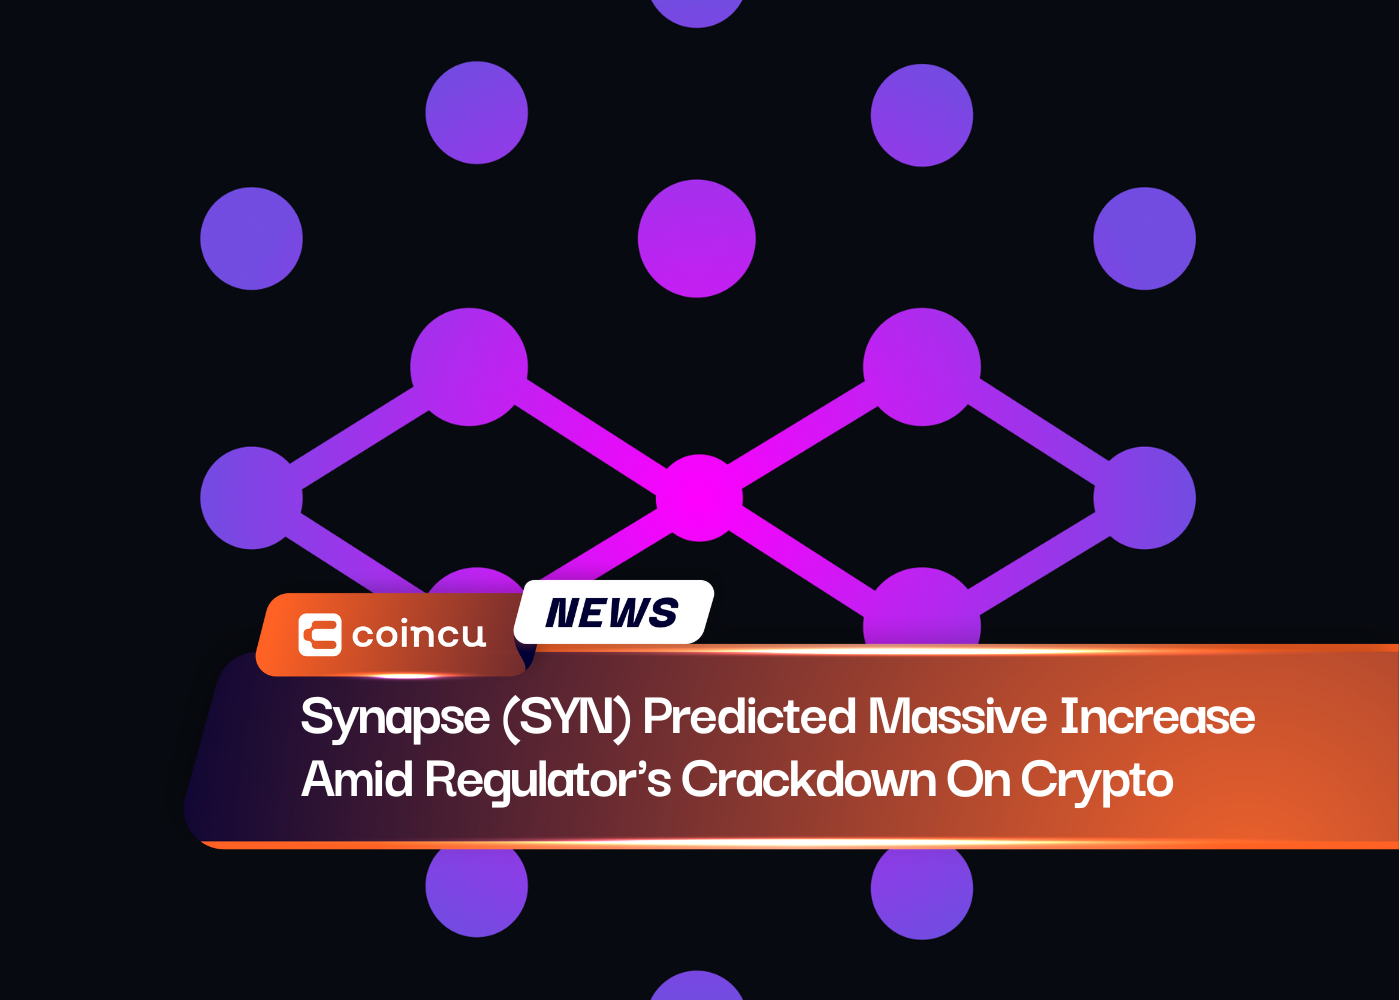 Synapse (SYN) Predicted Massive Increase Amid Regulator's Crackdown On Crypto